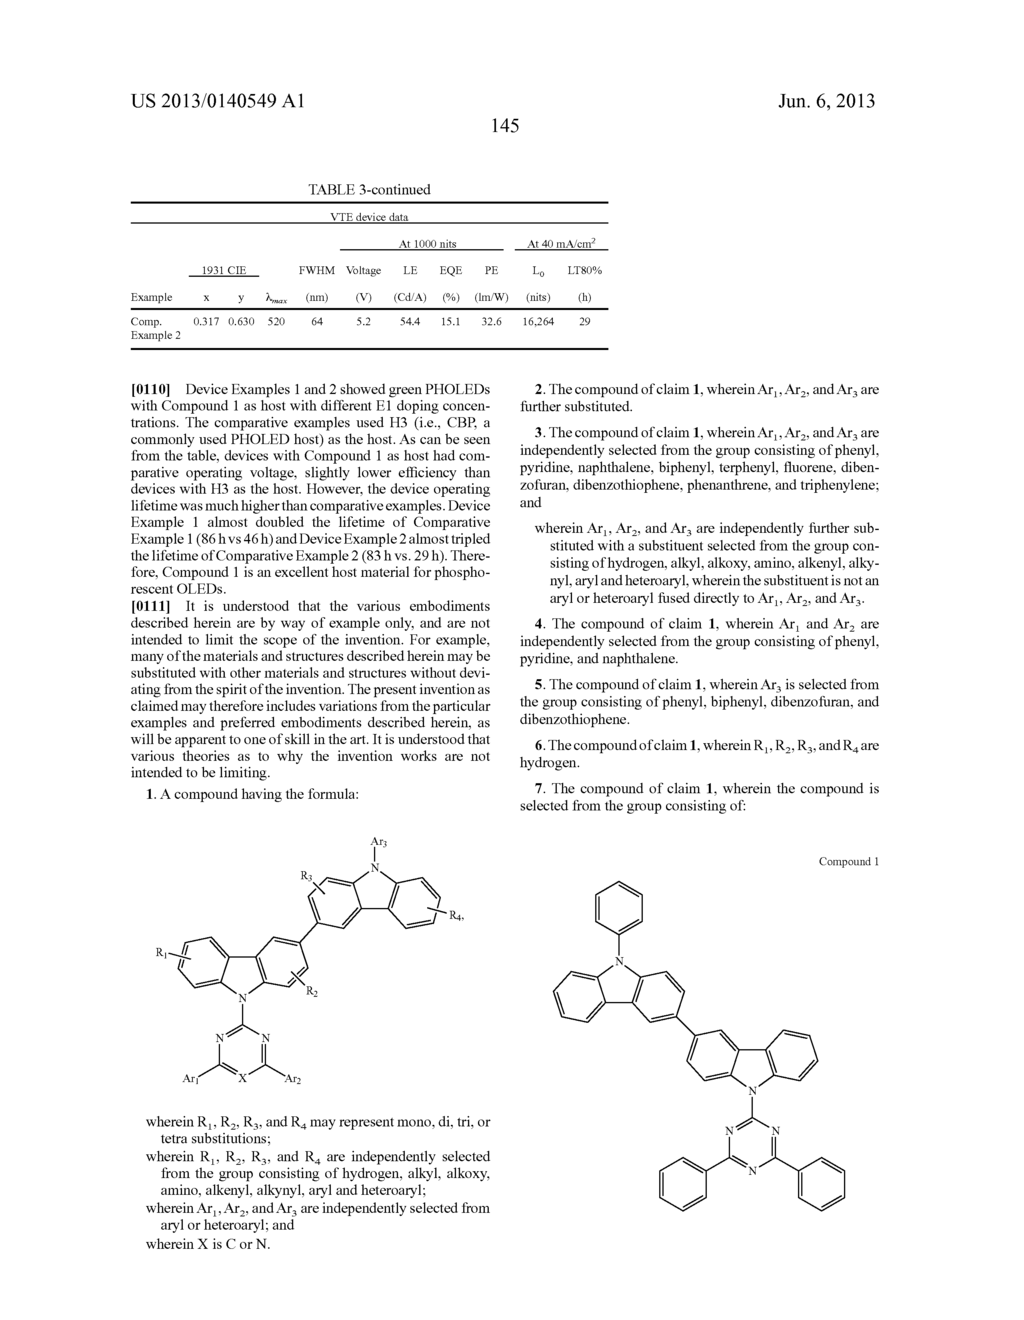 BICARBAZOLE COMPOUNDS FOR OLEDS - diagram, schematic, and image 149